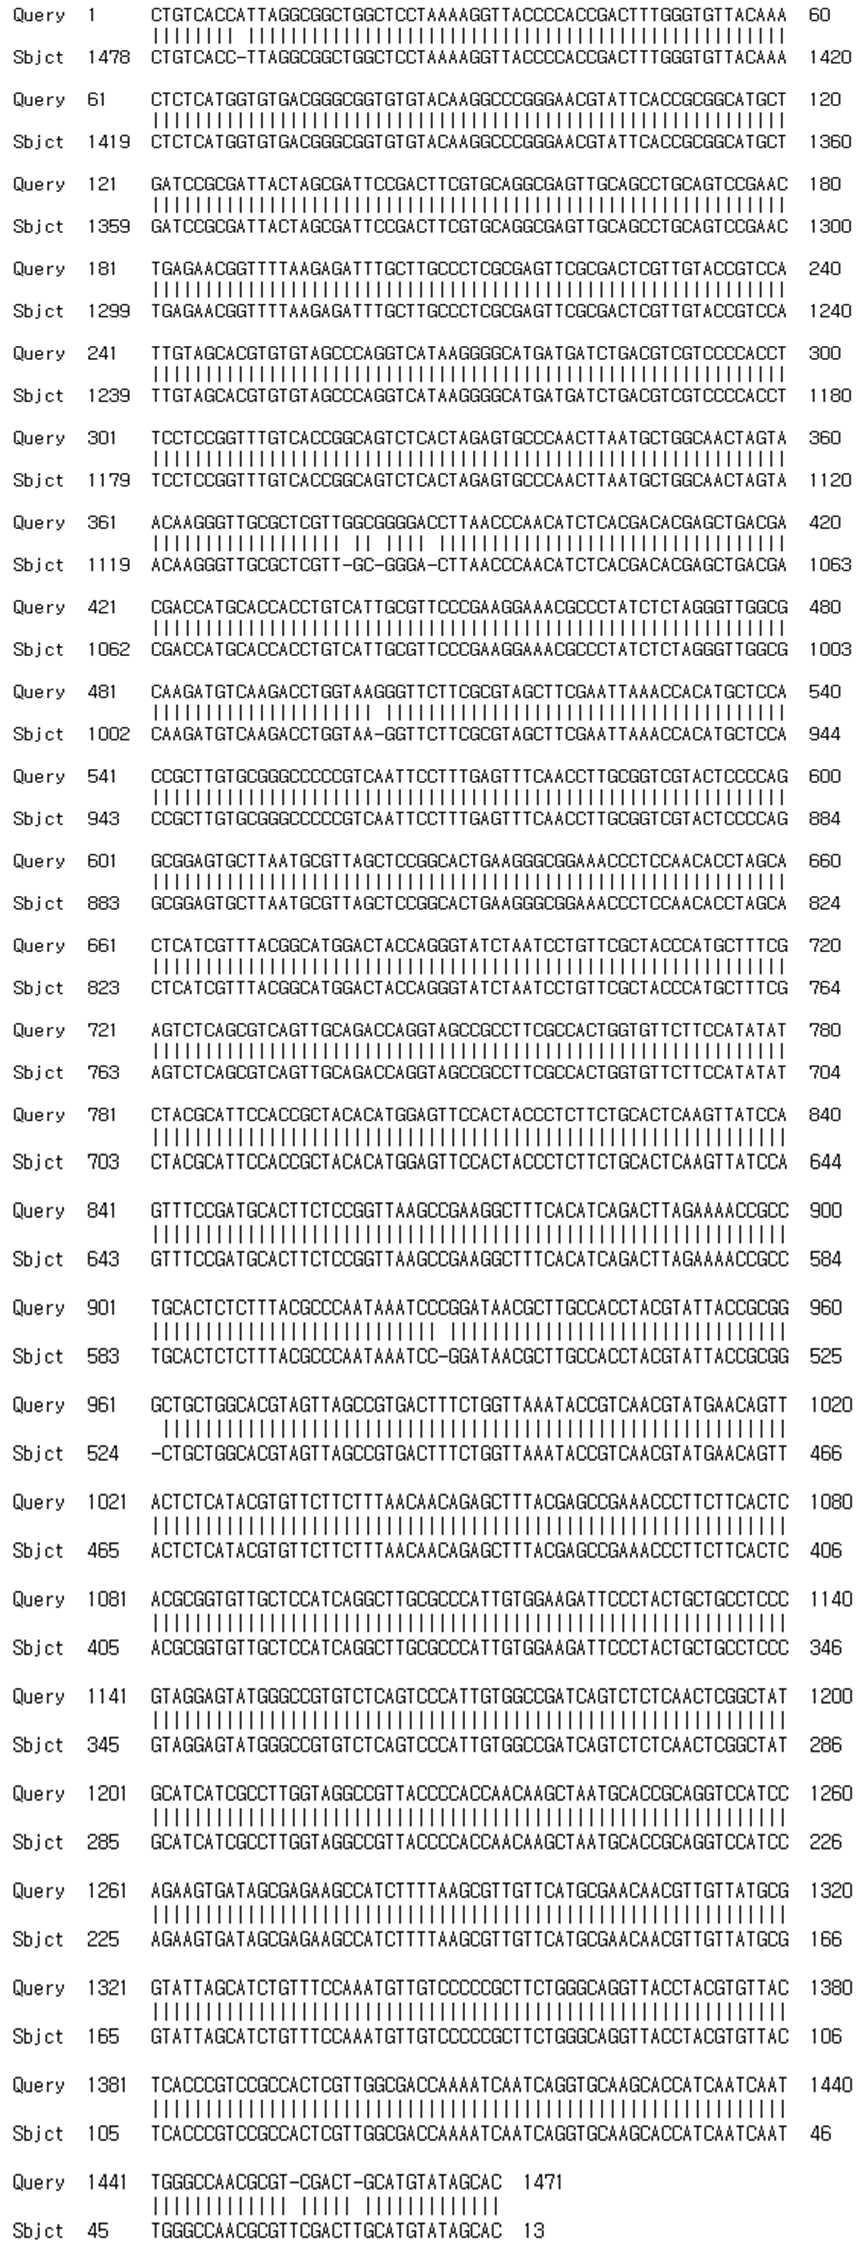 16S rRNA sequencing of B-182 strain